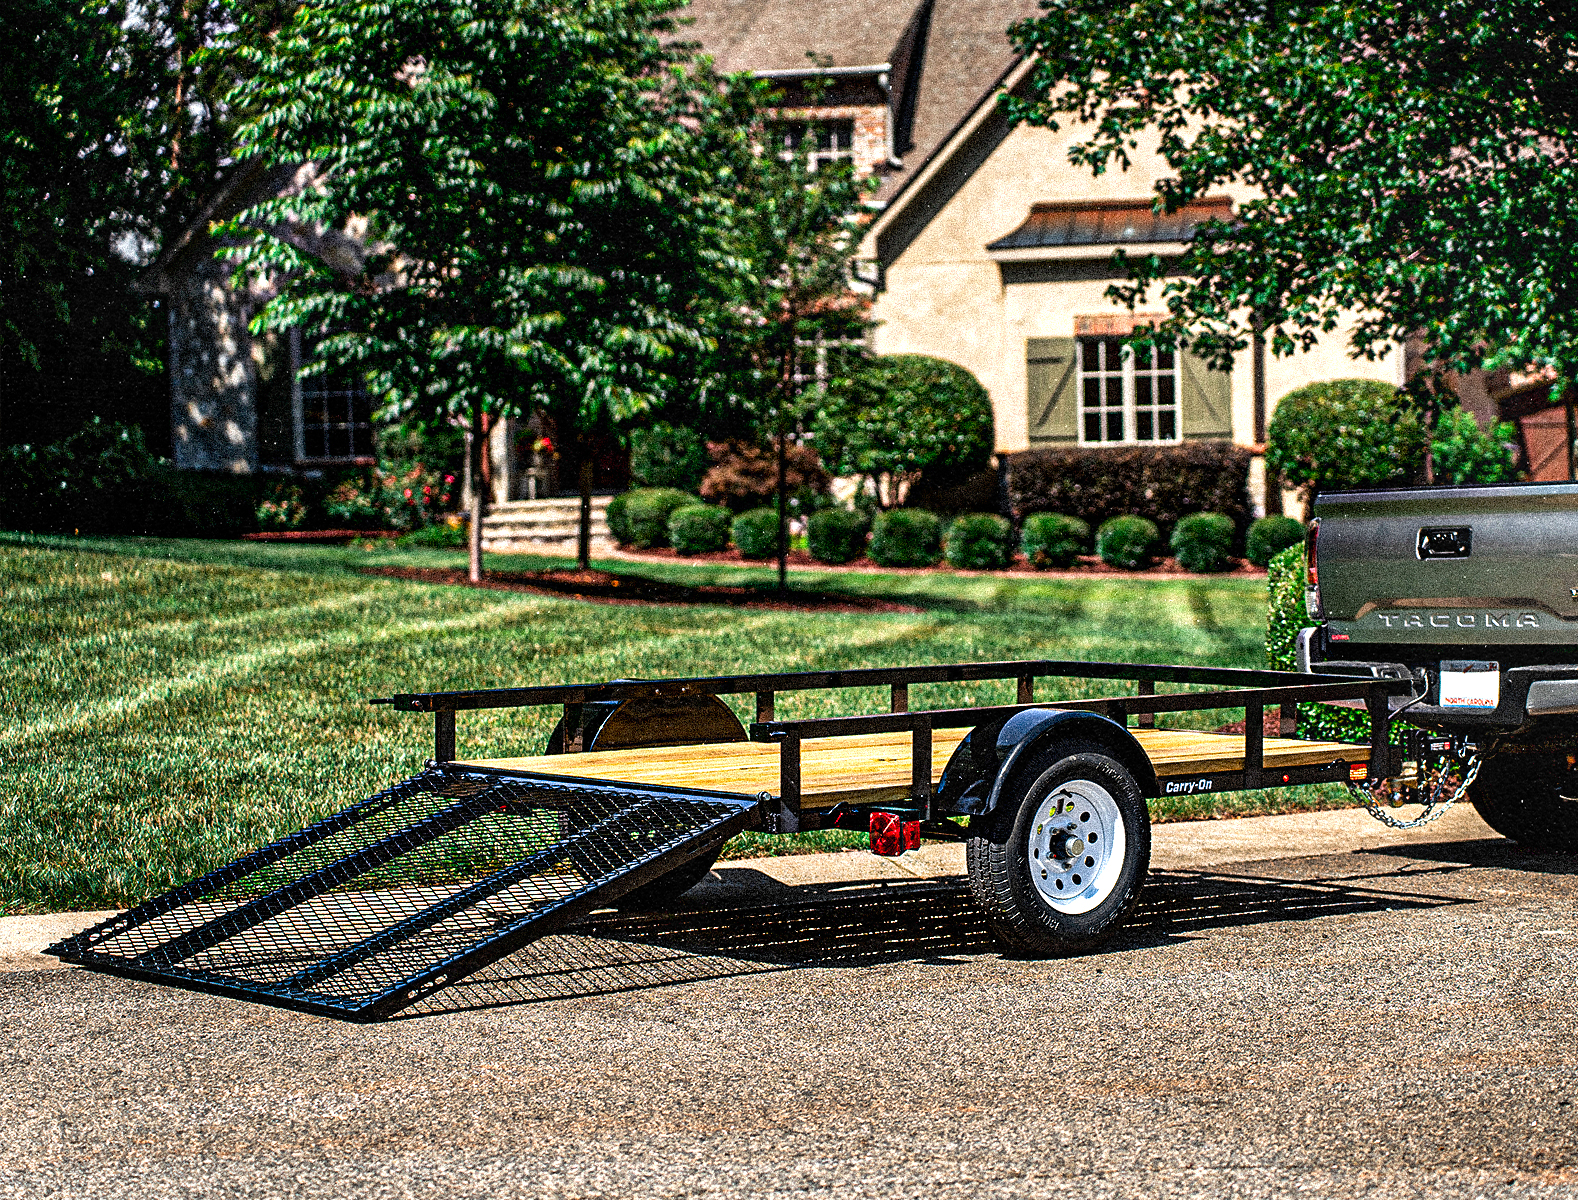 Wood floor utility trailer with gate down hitched to truck